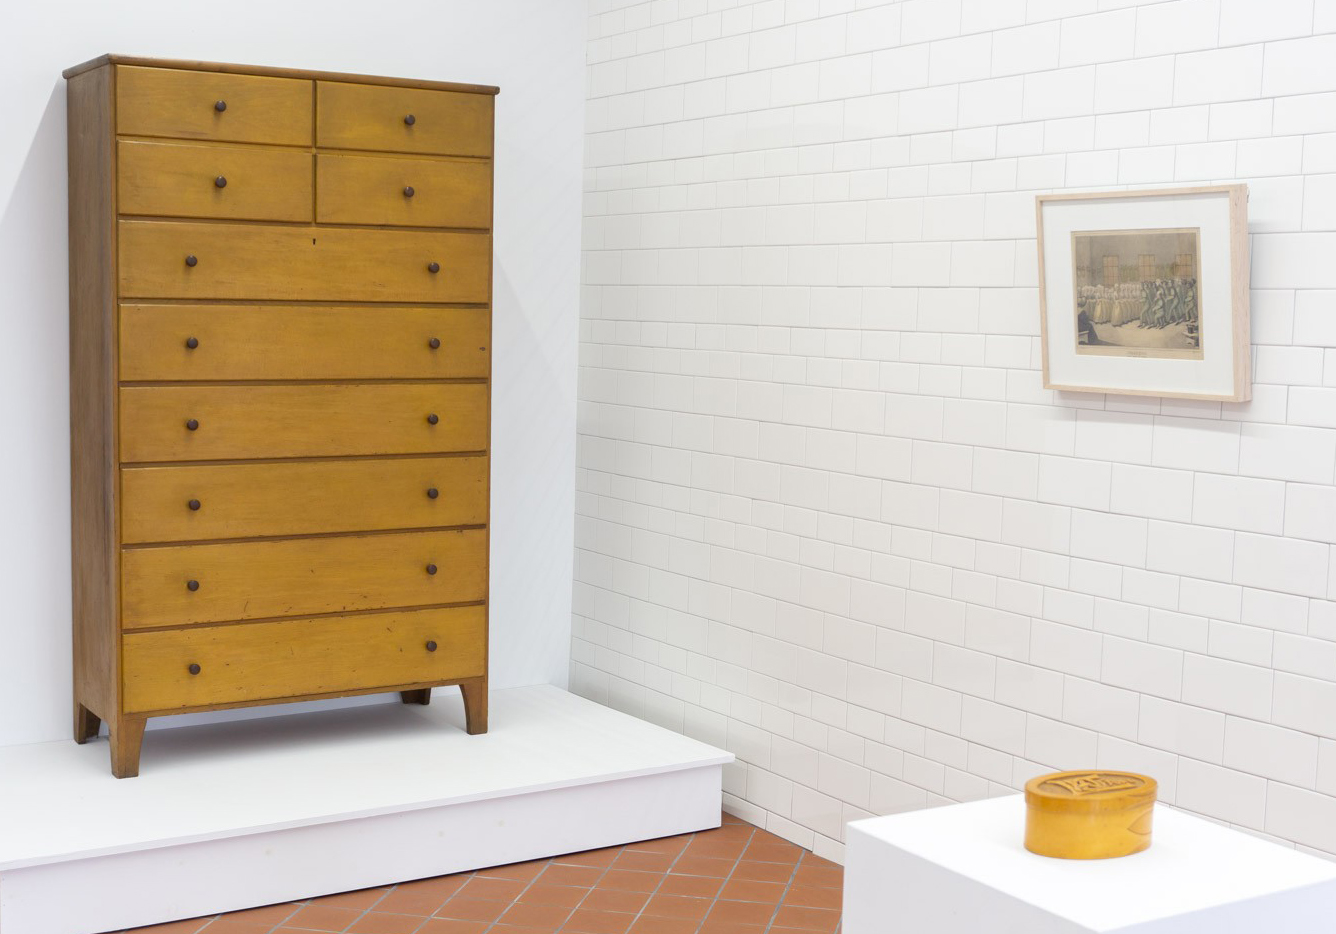 A yellow dresser is on display in a white room.